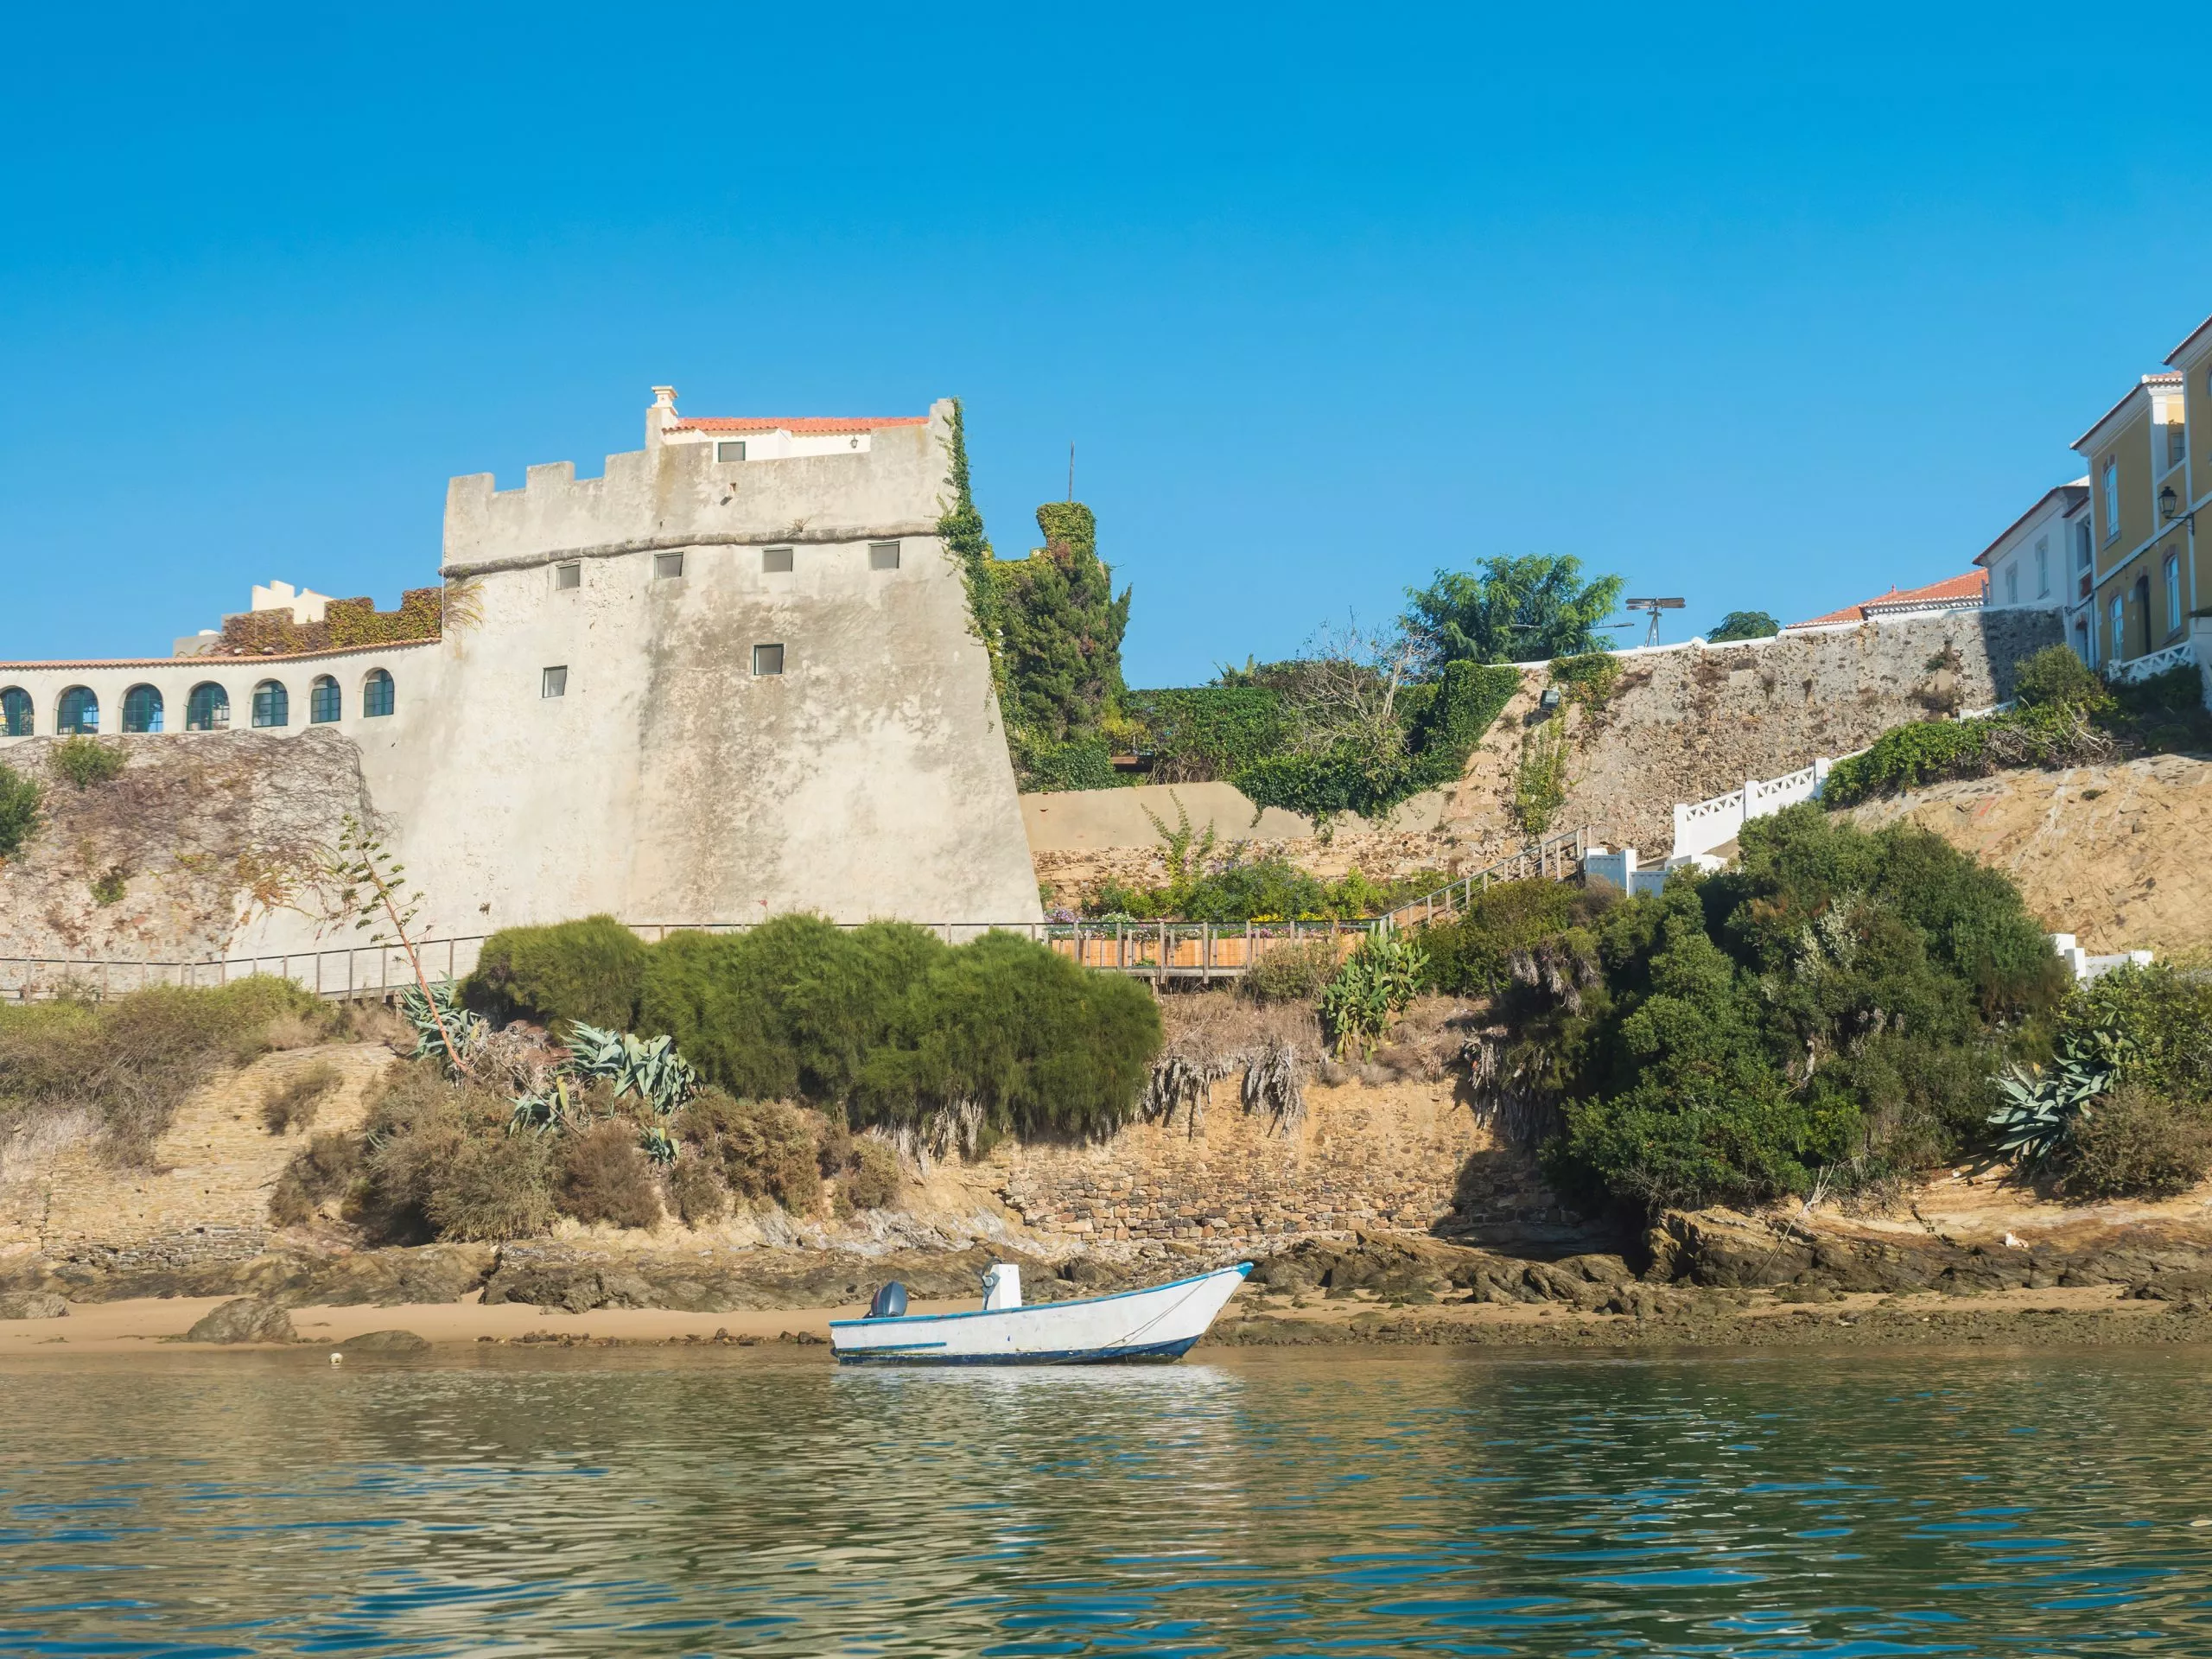 View of medieval fort Forte de Sao Clemente over the Mira river with small boat in sunny day with clear blue sky. Vila Nova de Milfontes, Portugal, Rota Vicentina coast